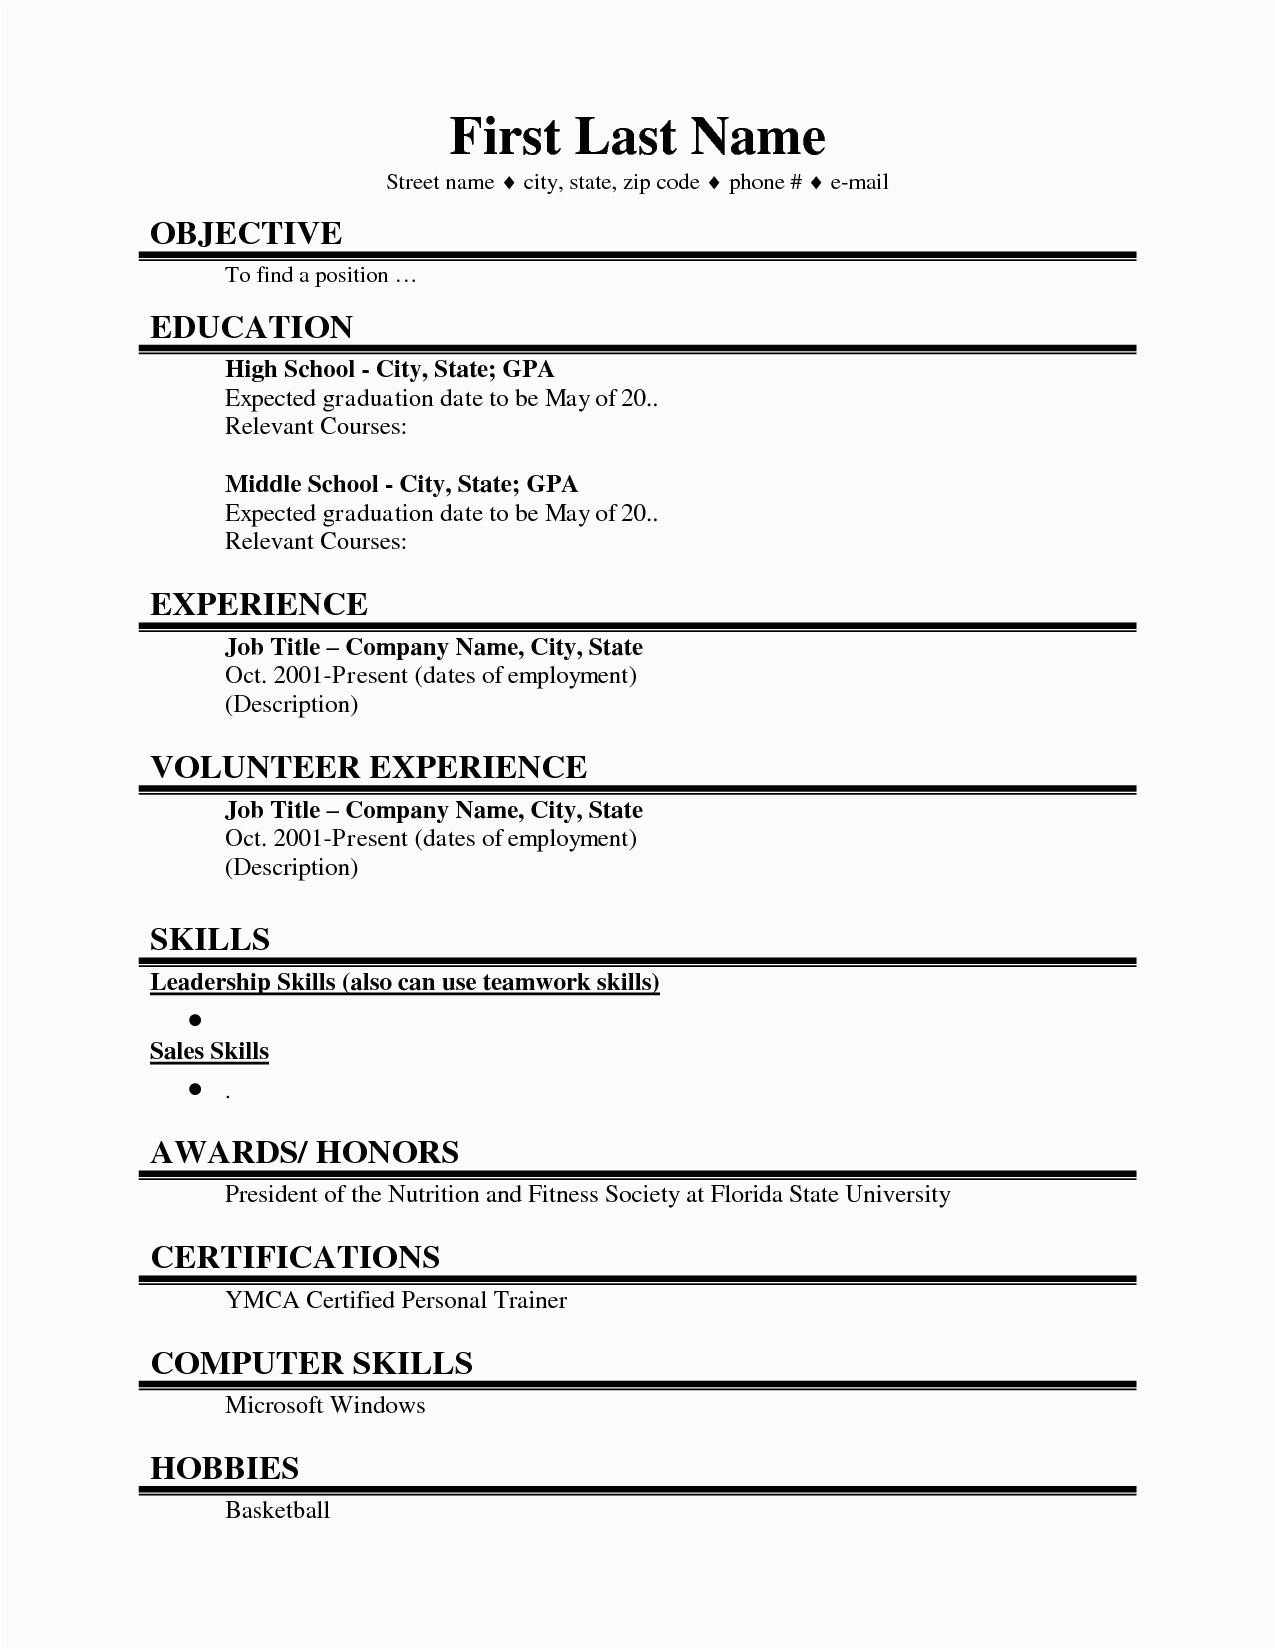 Best Resume Template for First Job 25 How to Make A Resume for First Job Sample Best